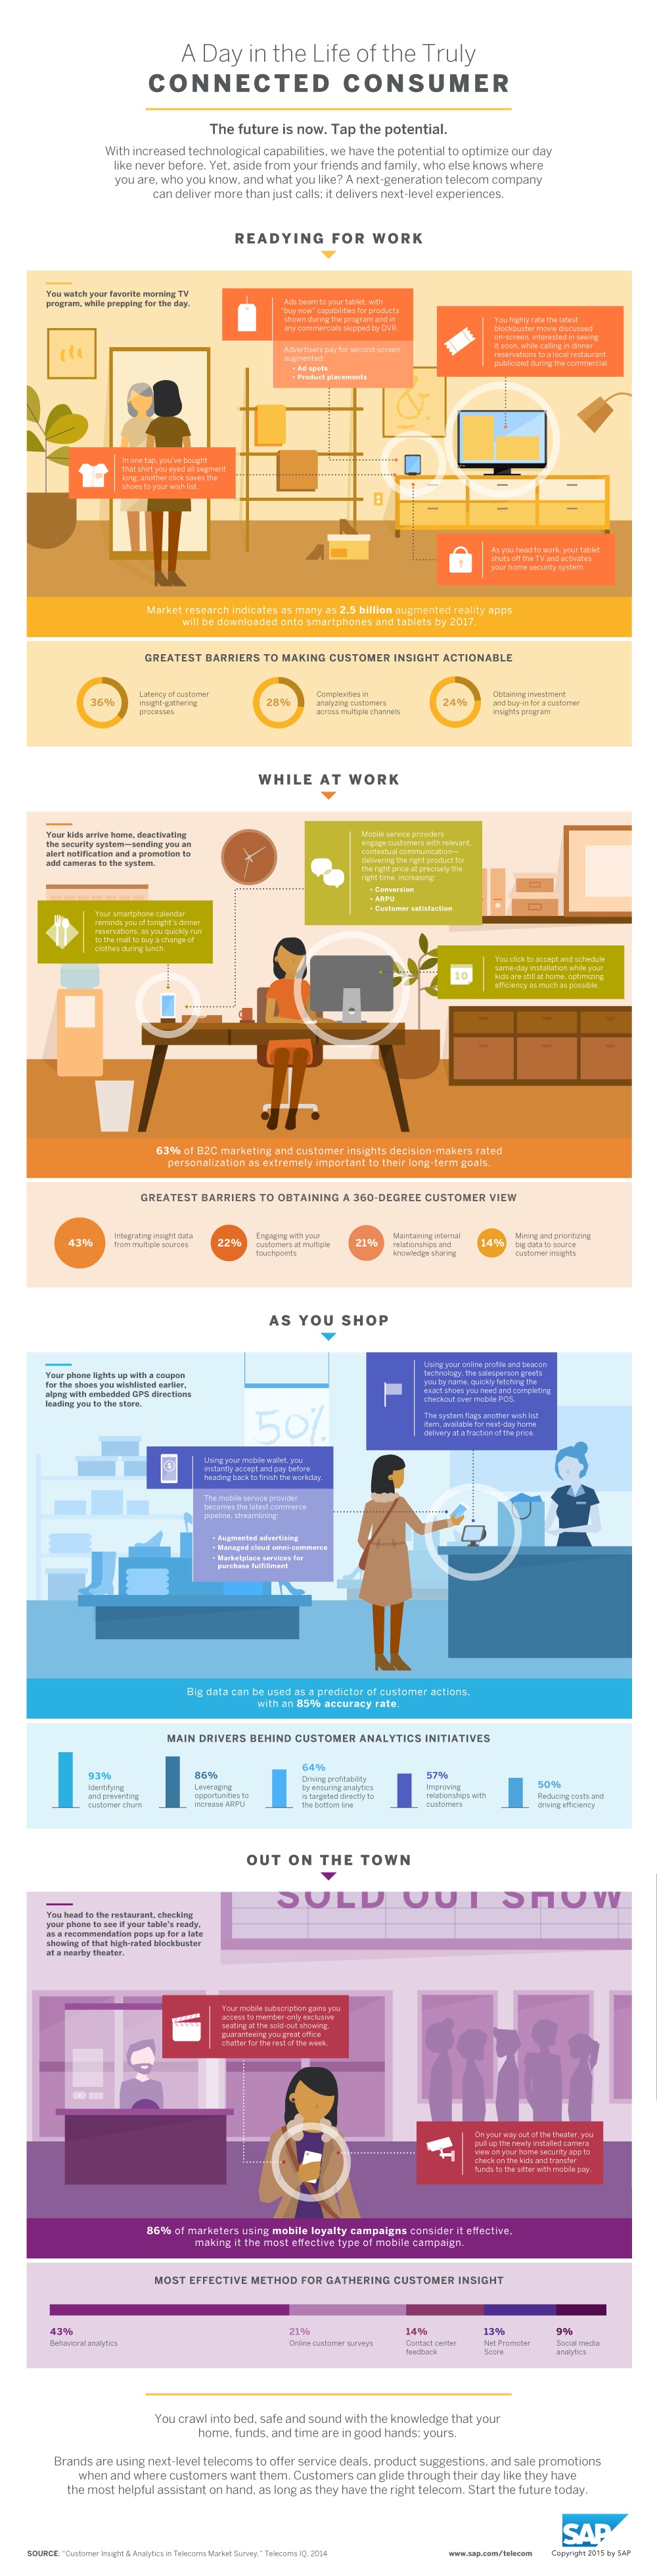 Connected Consumers: A Day in the Life (Infographic)